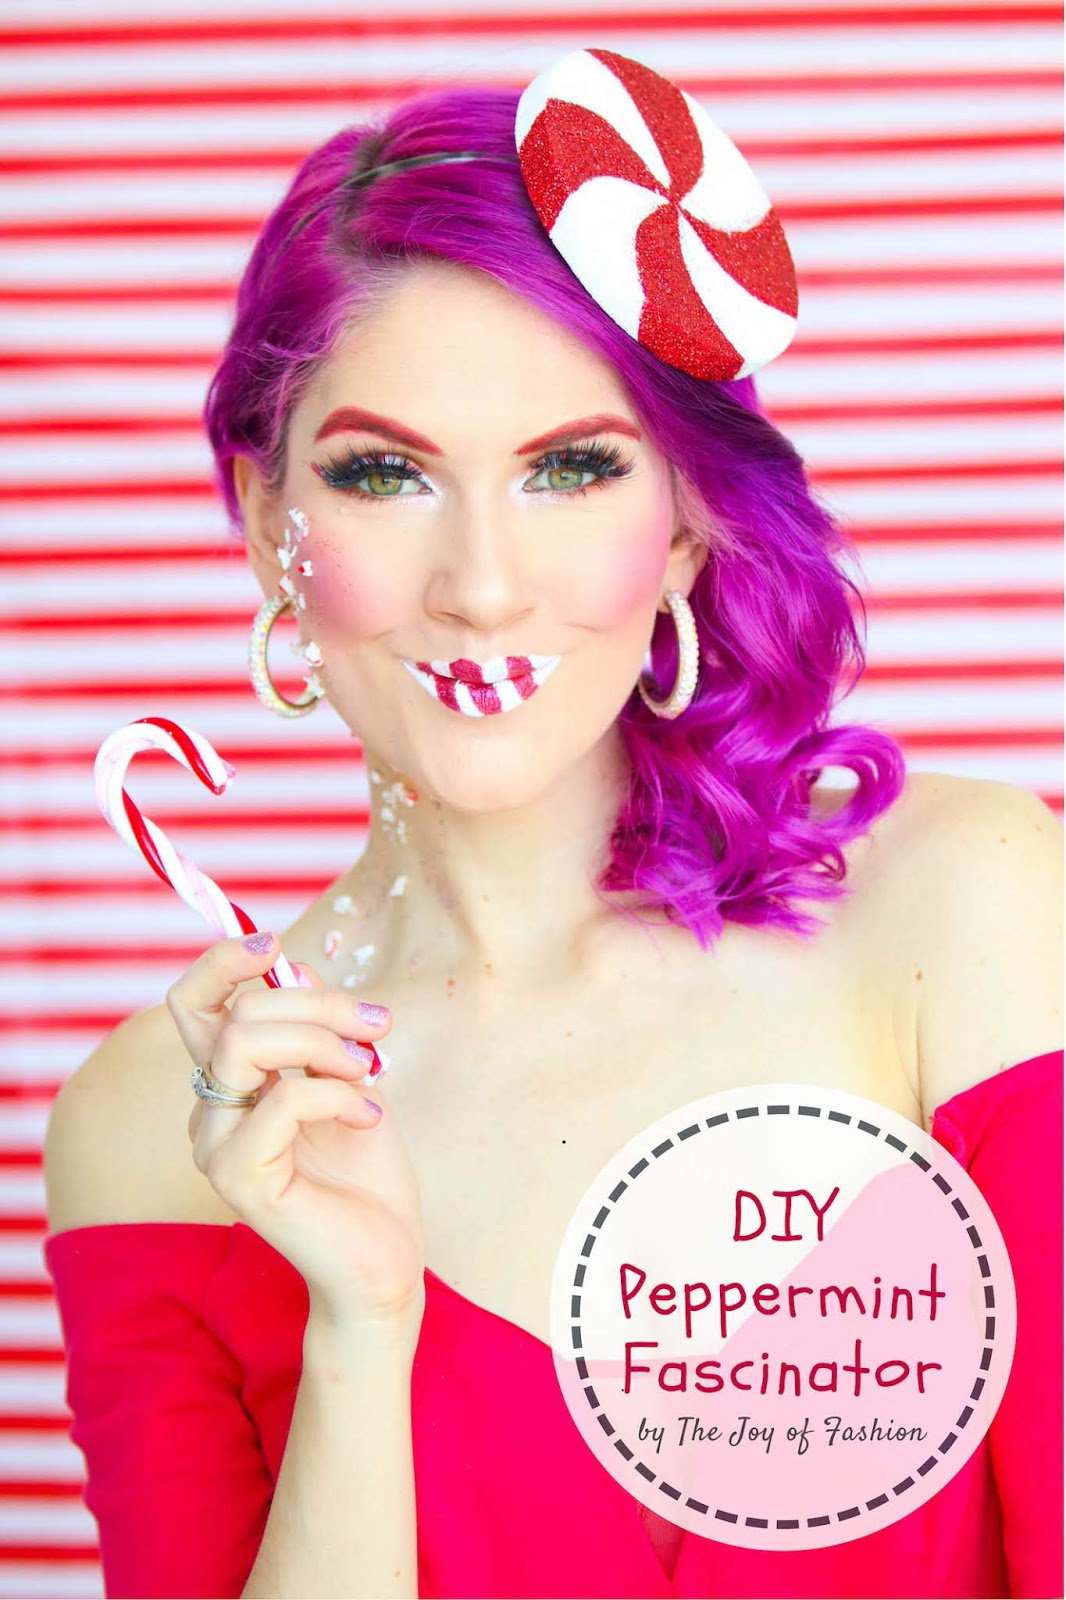 Follow this step by step tutorial on how to create an adorable Peppermint fascinator headband for Christmas!